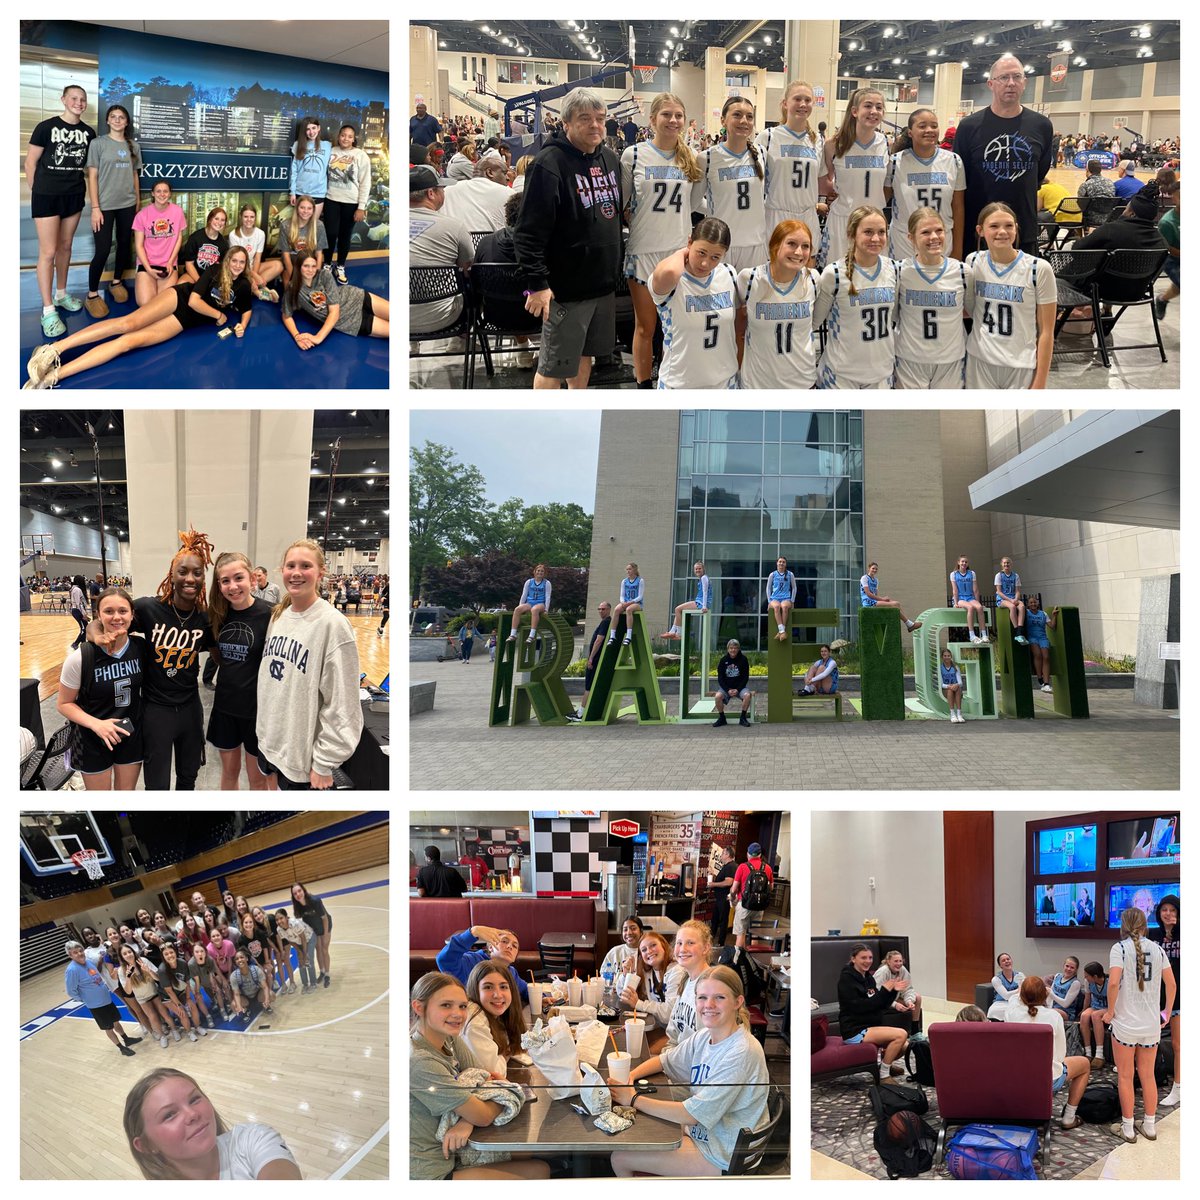 What a weekend of memories for Phoenix 2027!
#moreThanBasketball 
#makingMemories
#collegeVisits
#meetingFamousPeople
#NCAAlivePeriod 
#phoenixProud 
#phoenixPhamily